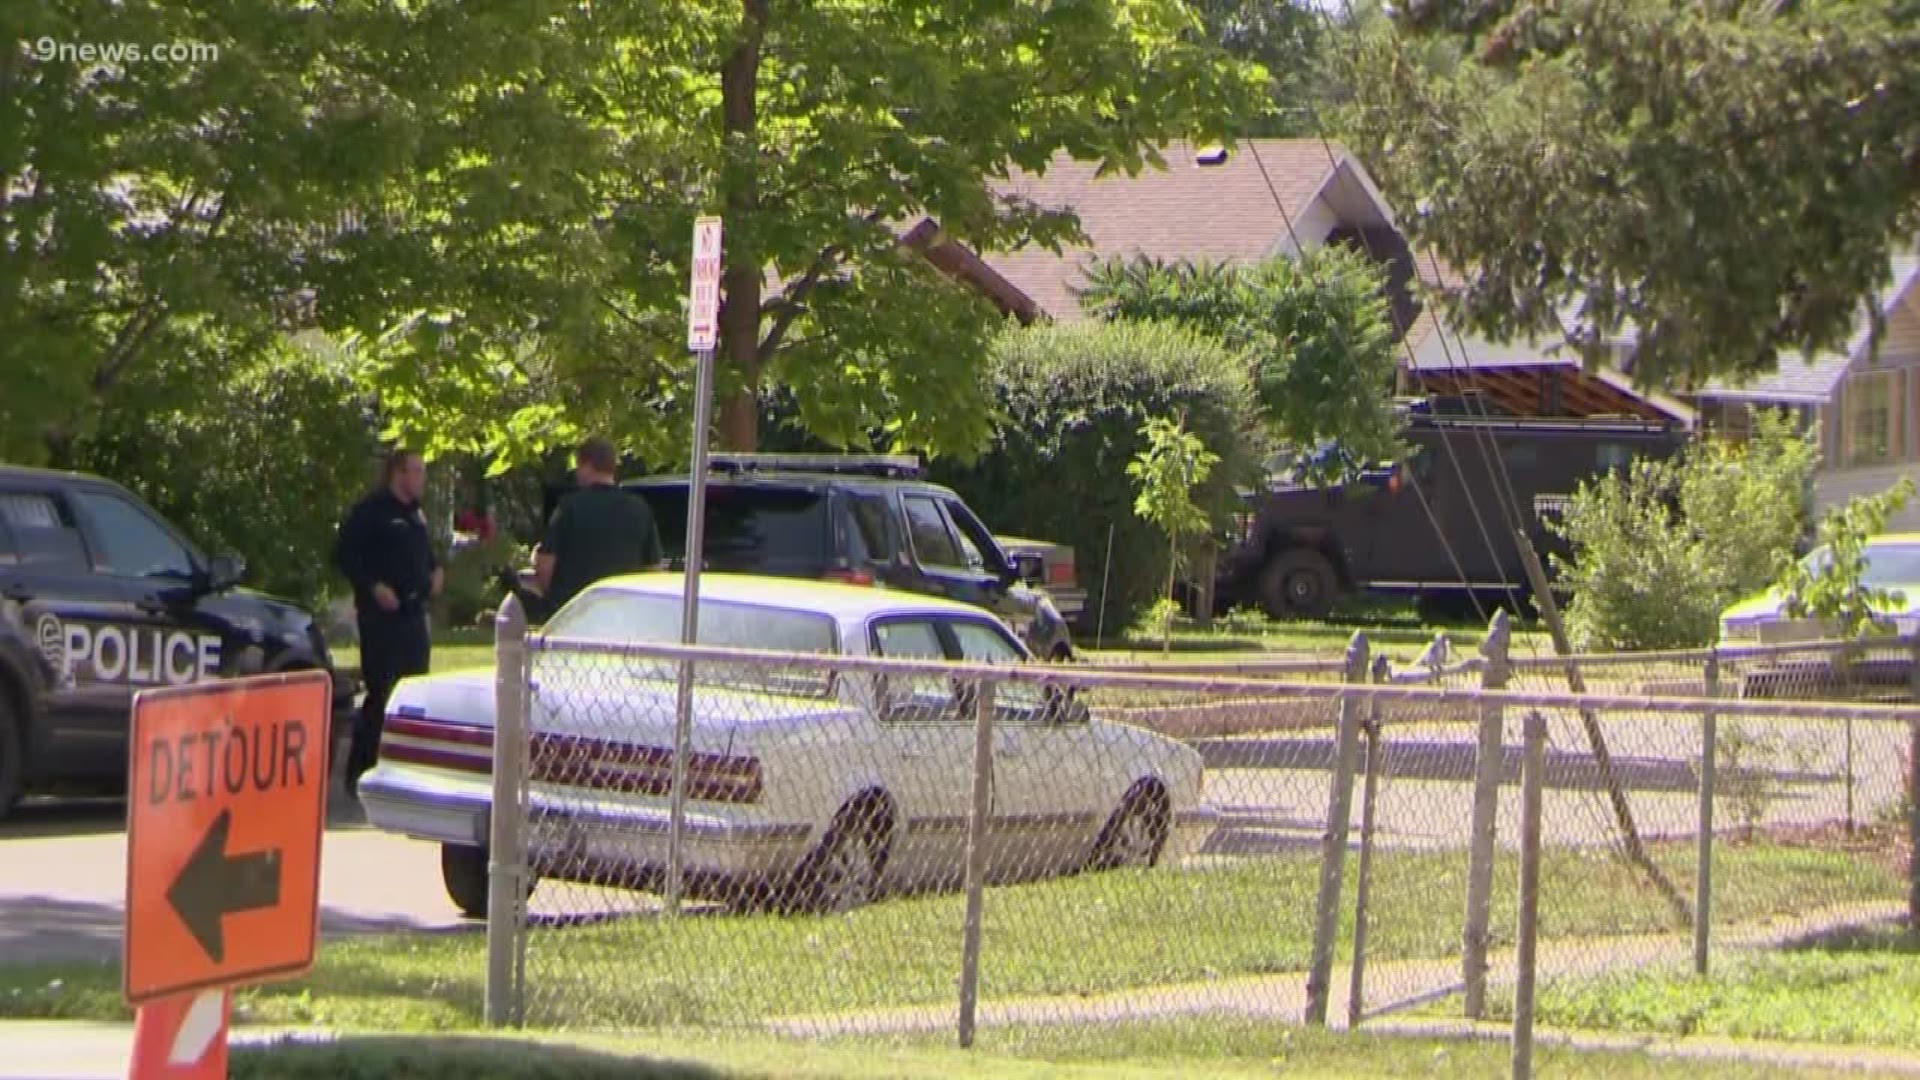 Law enforcement officers have surrounded a home in Edgewater where a suspect has barricaded himself inside.